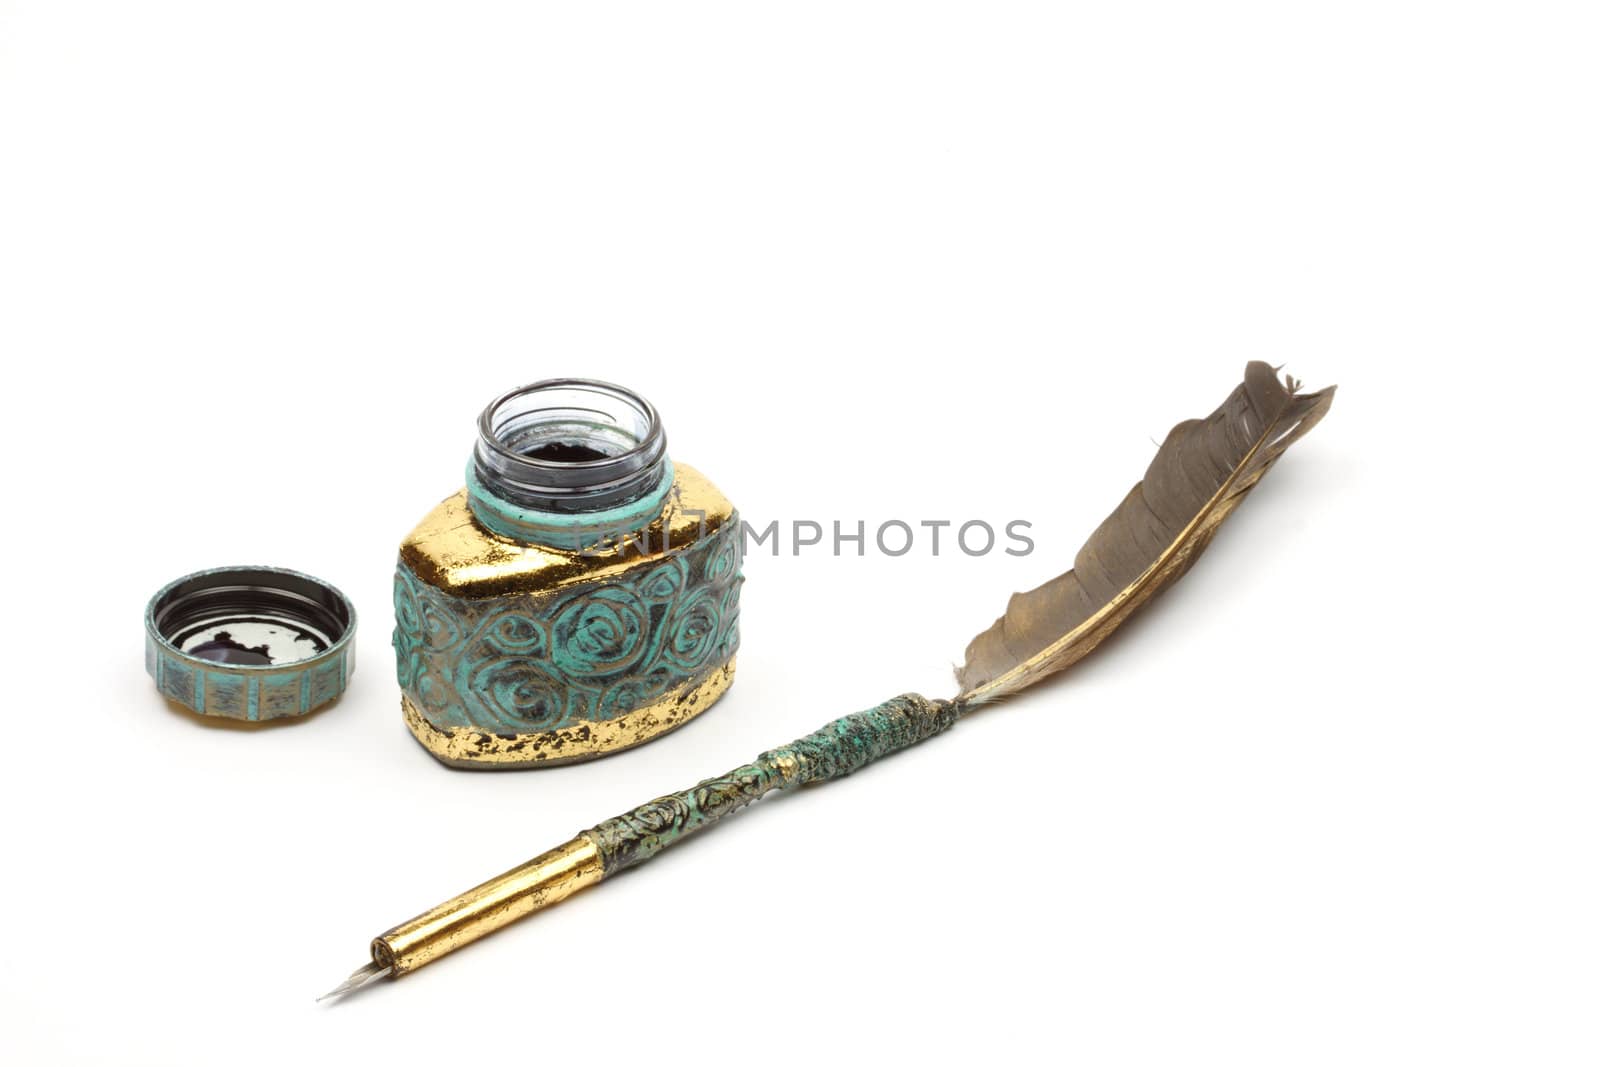 quill and inkwell by alexkosev